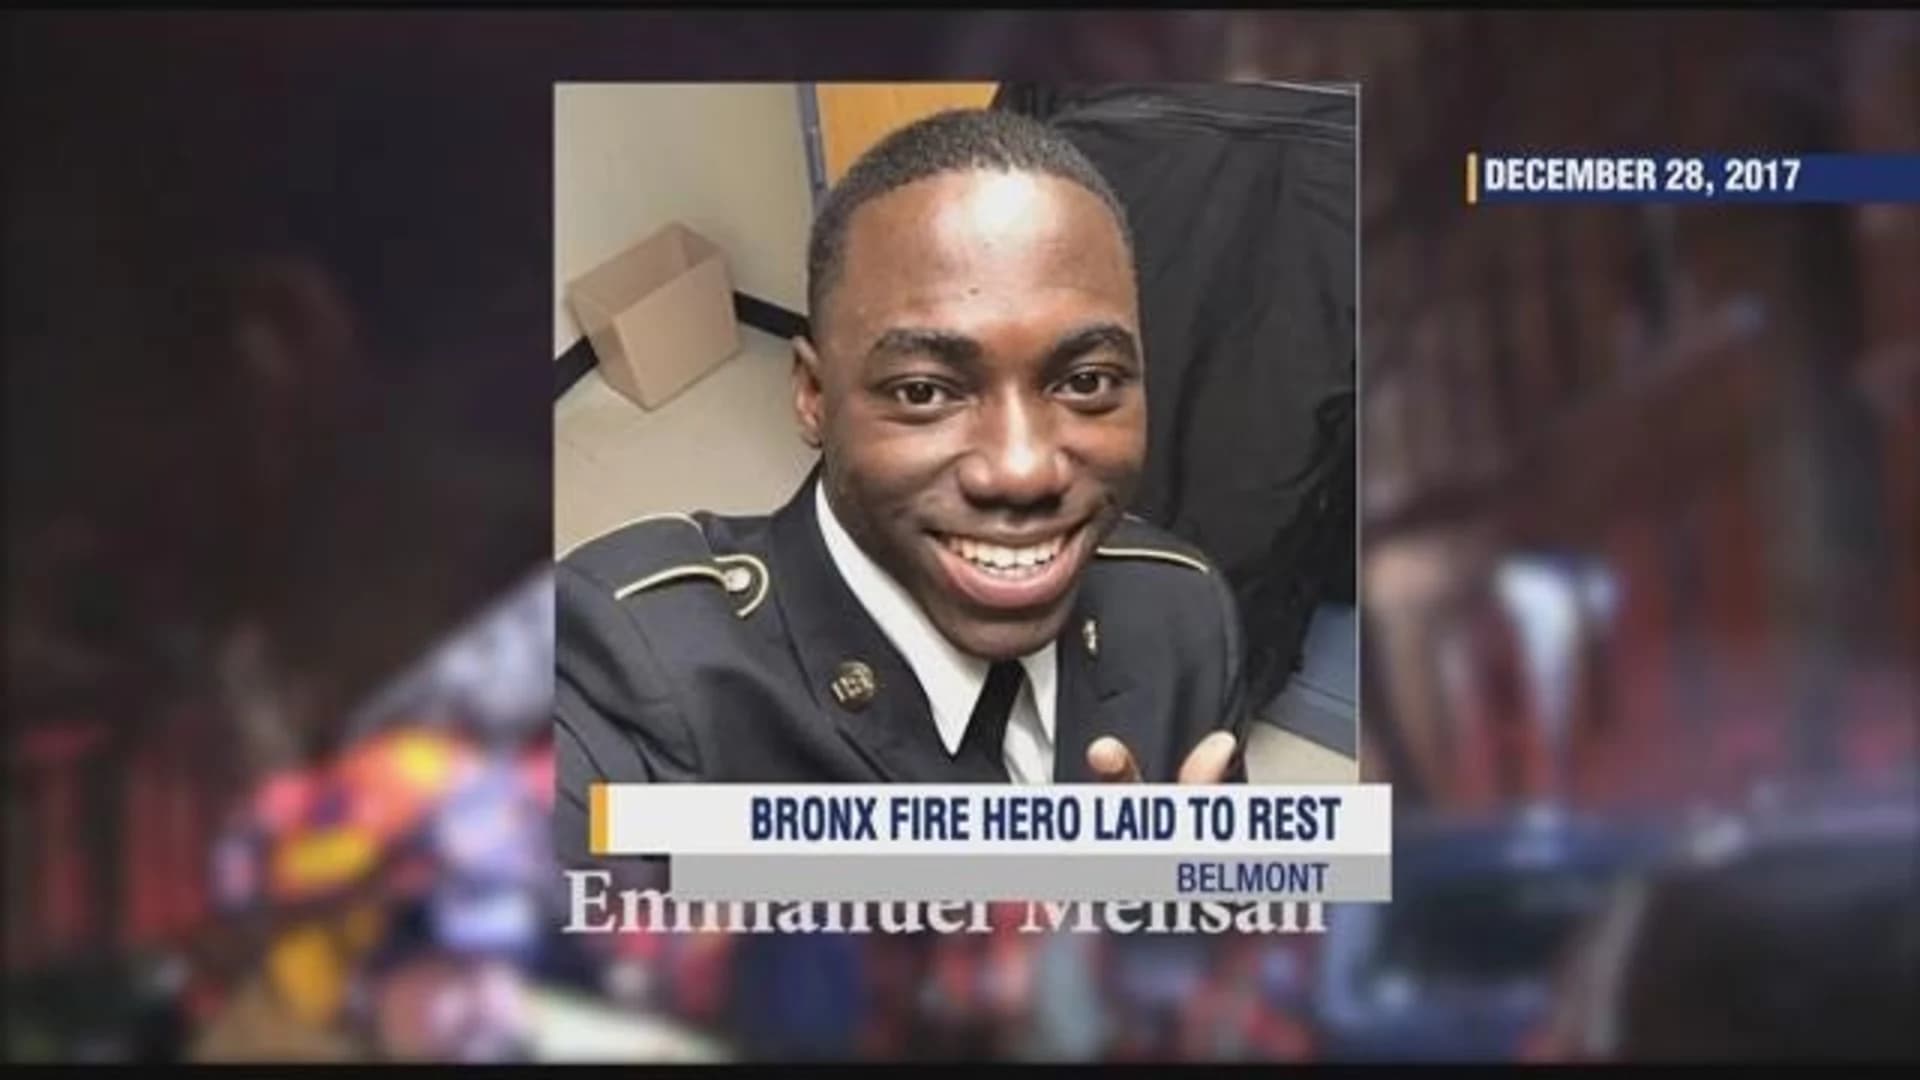 Funeral held for soldier who saved lives during fatal Belmont fire